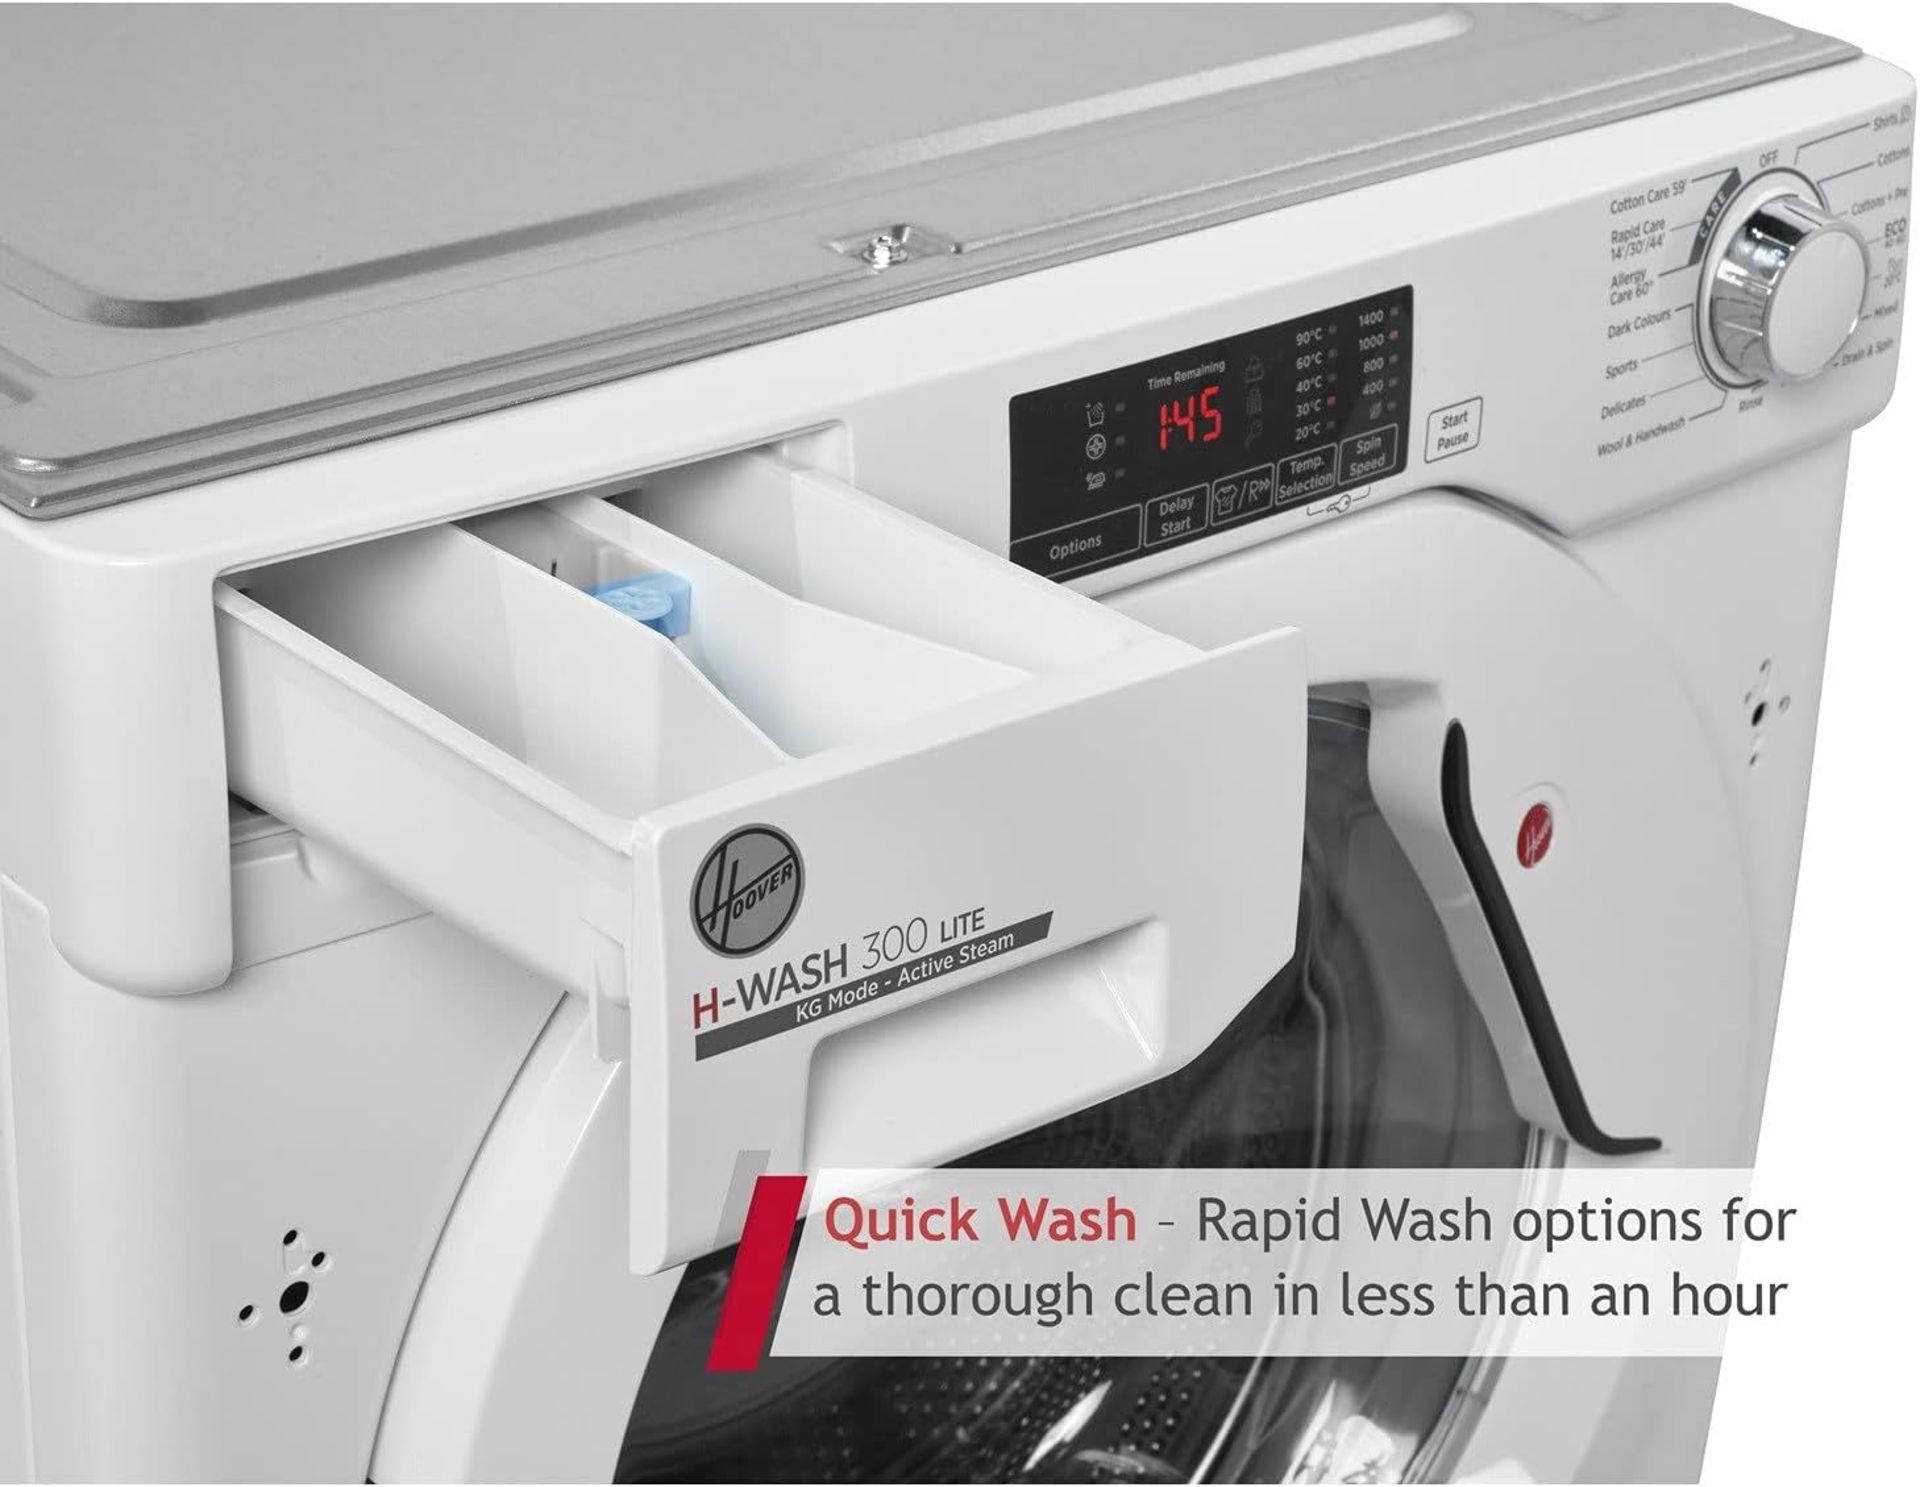 Hoover H-Wash 300 HBWS49D1E Integrated Washing Machine, 9KG, 1400RPM, White. - H/S. RRP £569.99. - Image 3 of 3